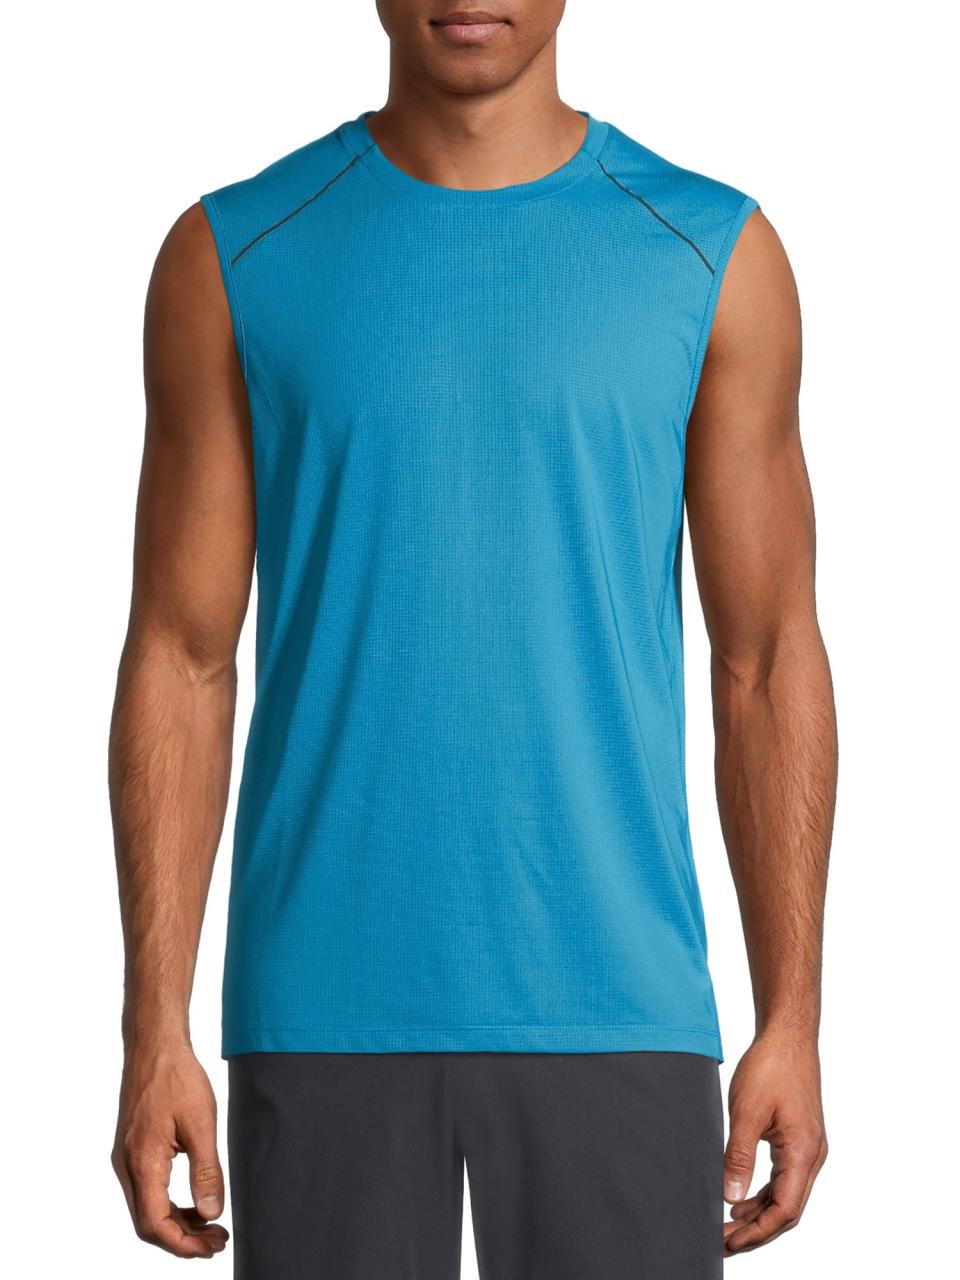 Short Shopify Simple Shaka Wear Sleeveless Sky Blue Streetwear Sport Sport Sublimation Delivery Boy Double Layer Download T Distressed Dark Blue Dri Fit Dark Gray Dark Grey Download Drop Shoulder Girl T Shirt Mockup Psd Free Download